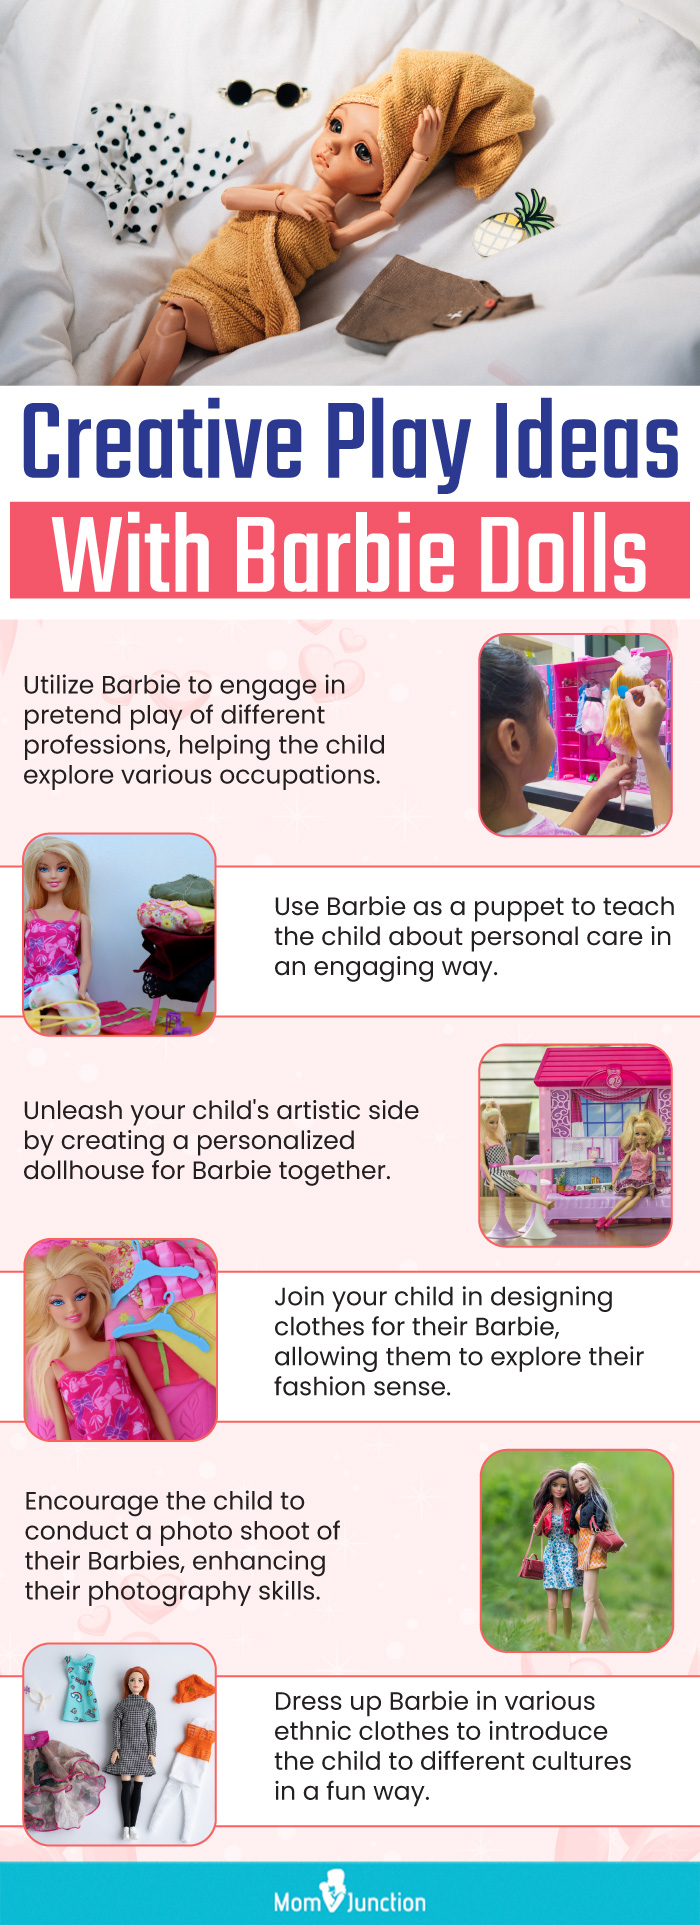 Creative Play Ideas With Barbie Dolls (infographic)